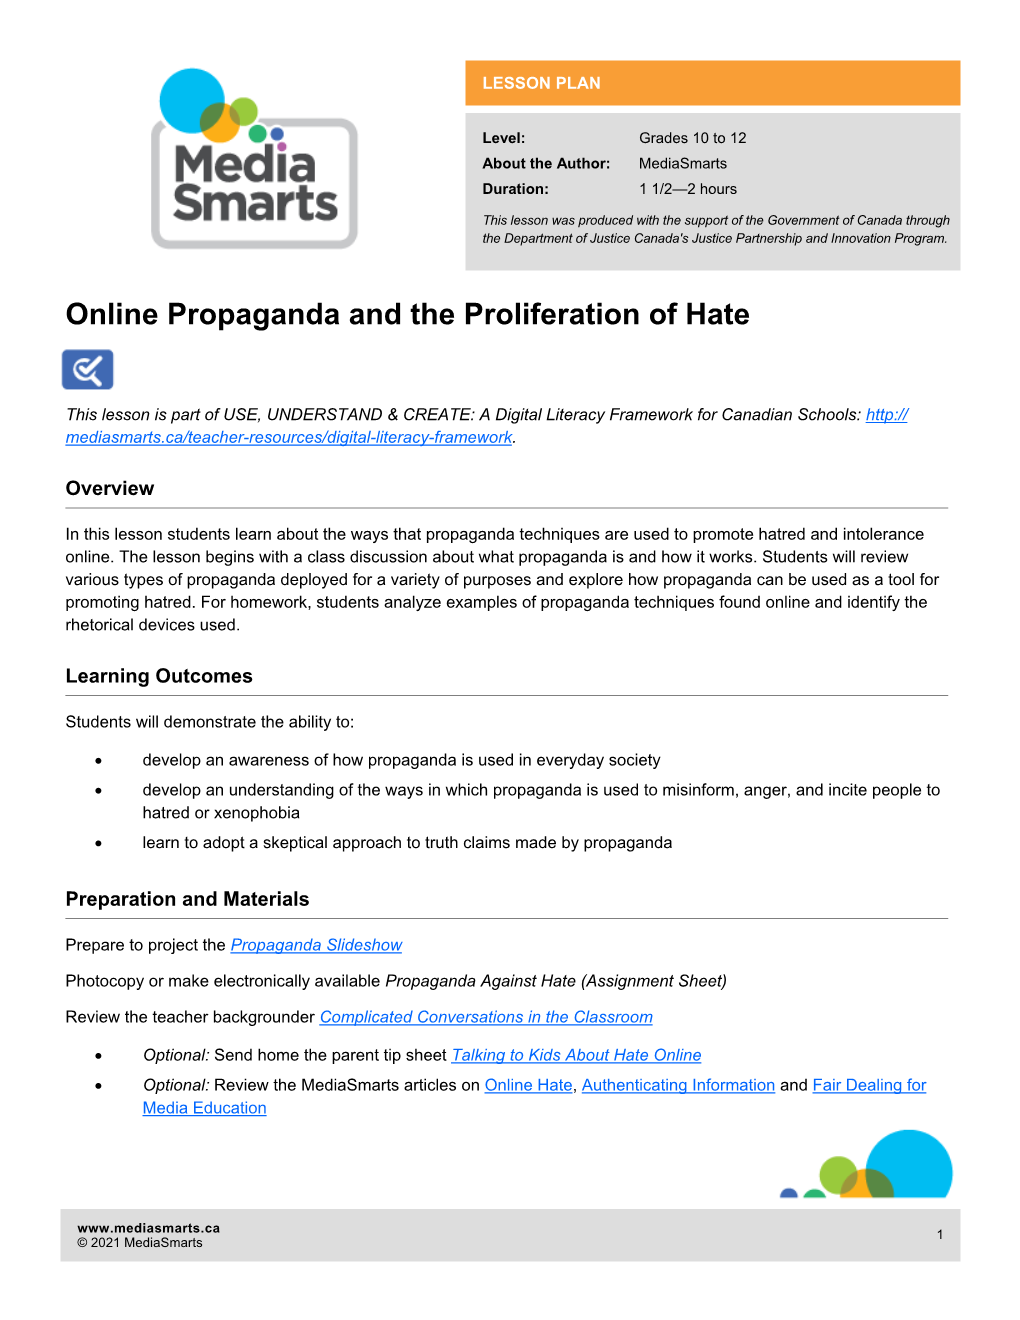 Online Propaganda and the Proliferation of Hate